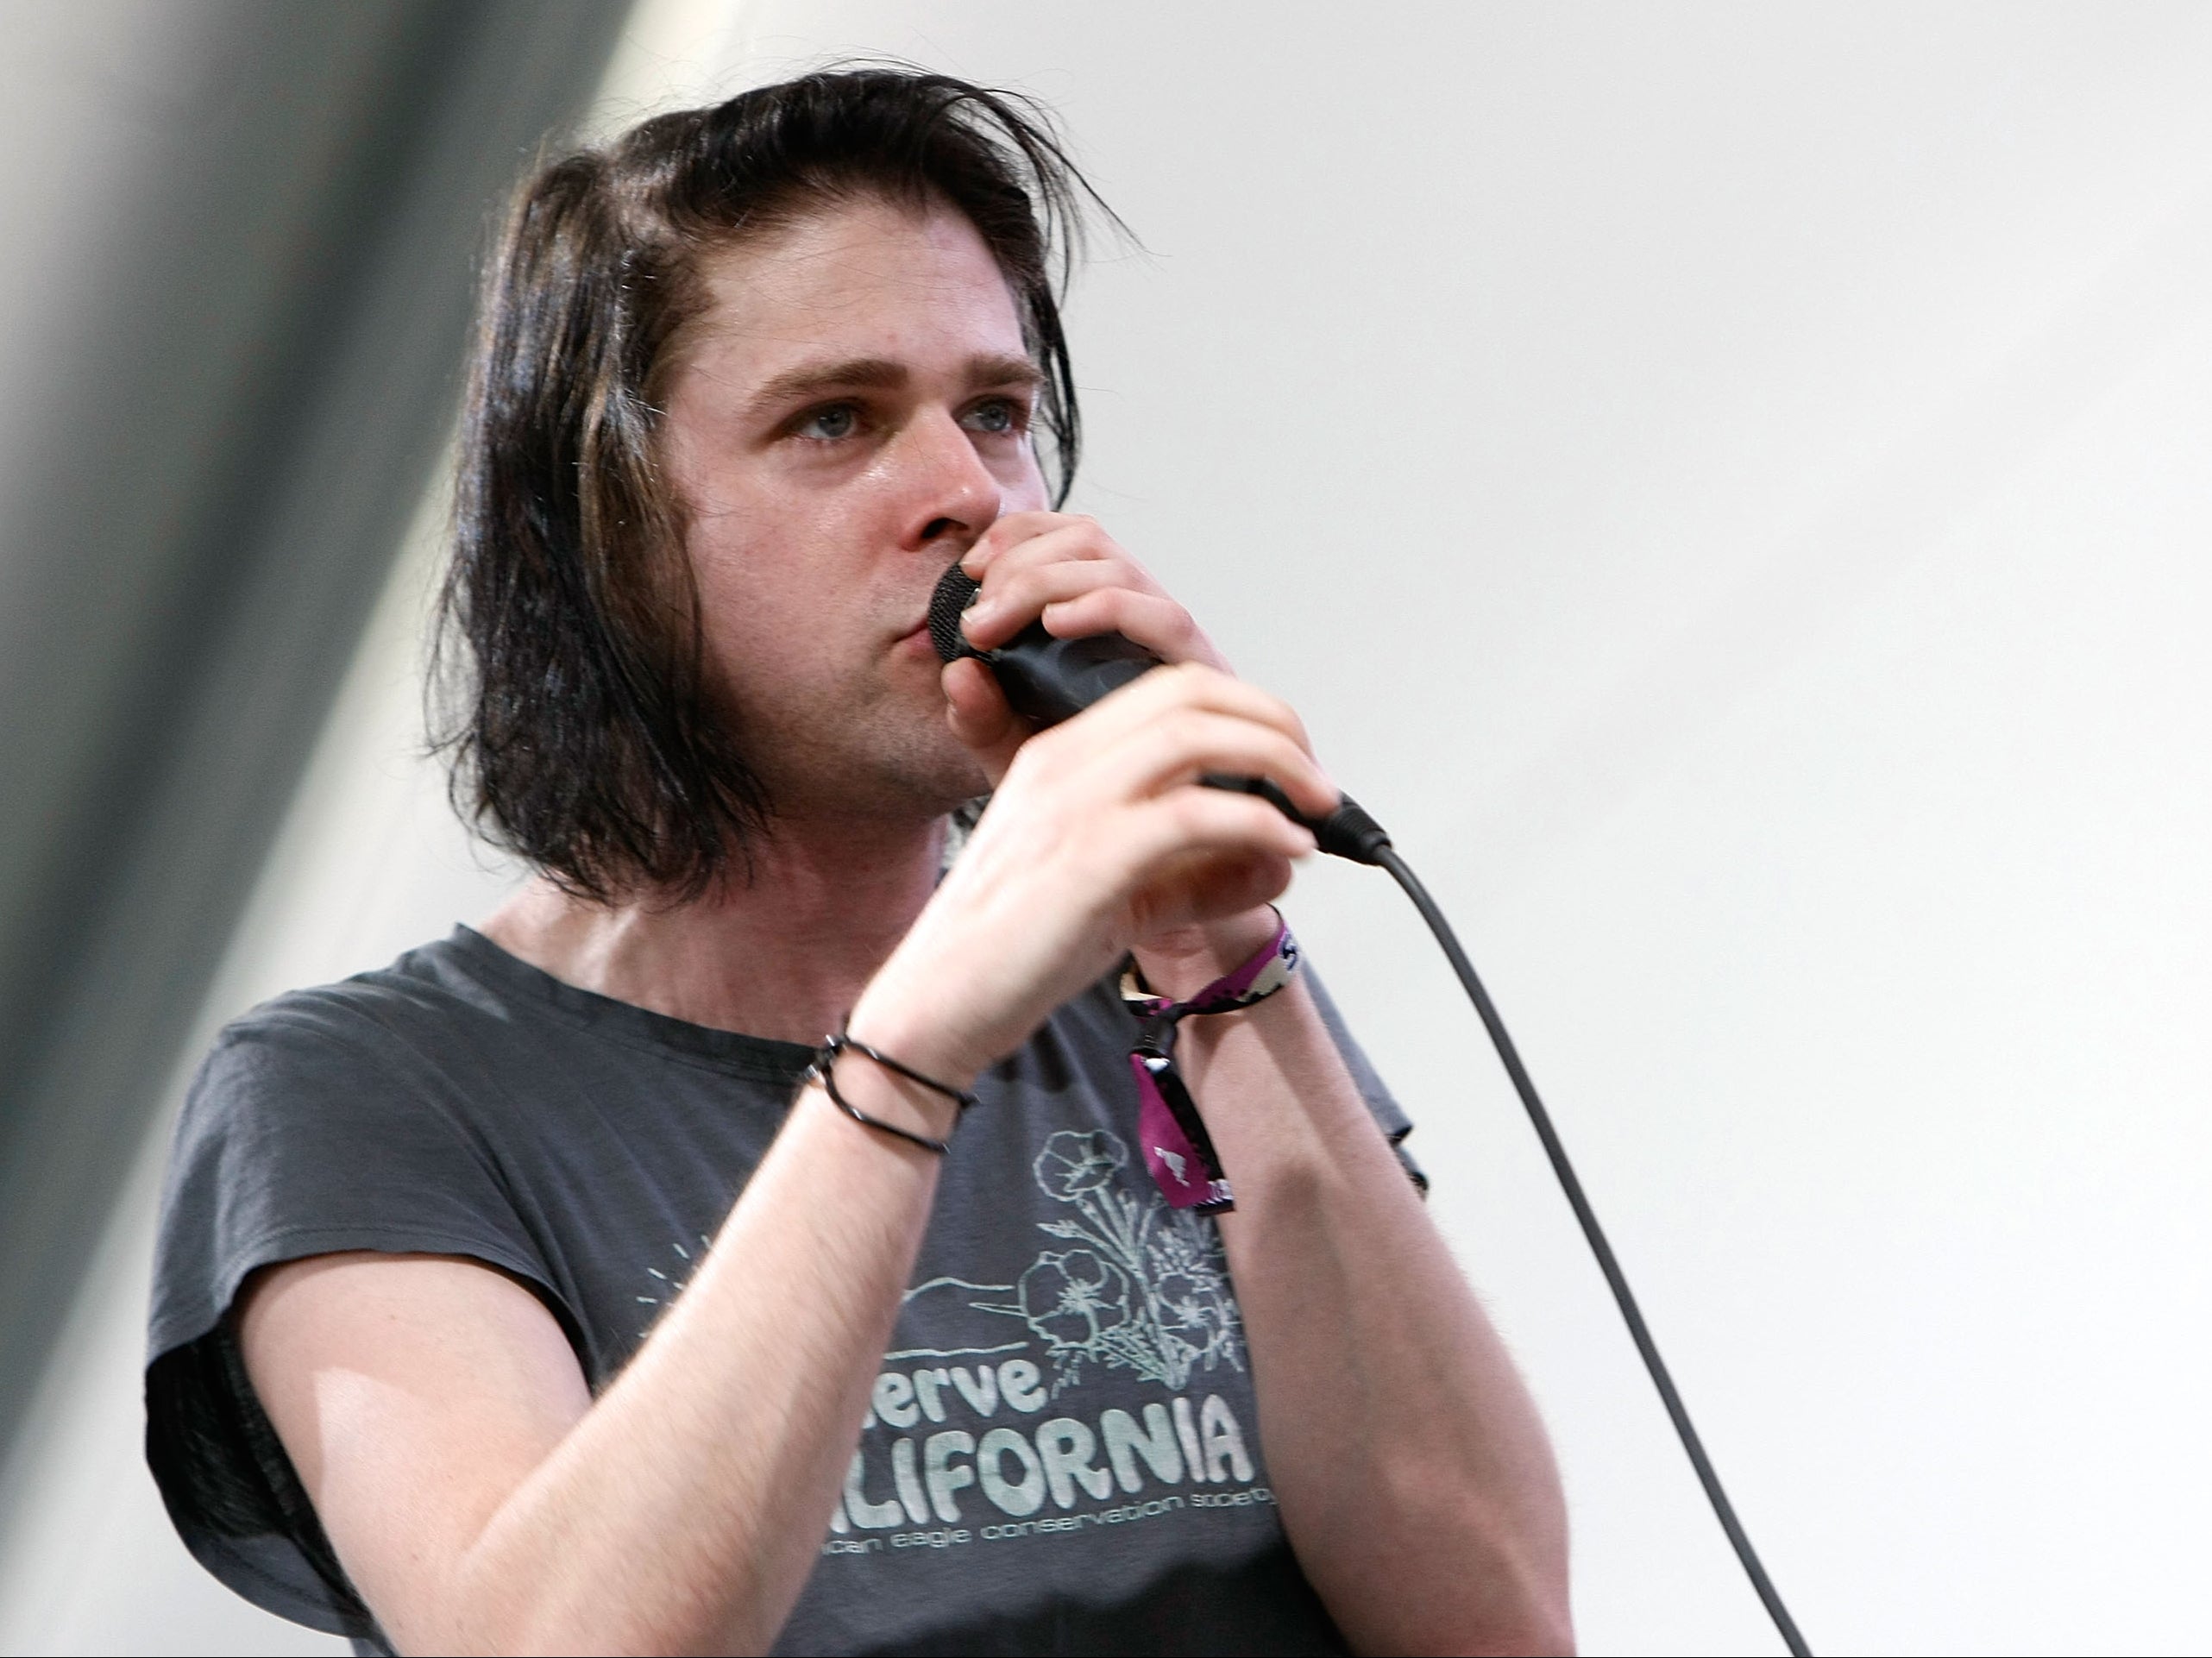 Ariel Pink fell for the label after attending the pro-Trump rally